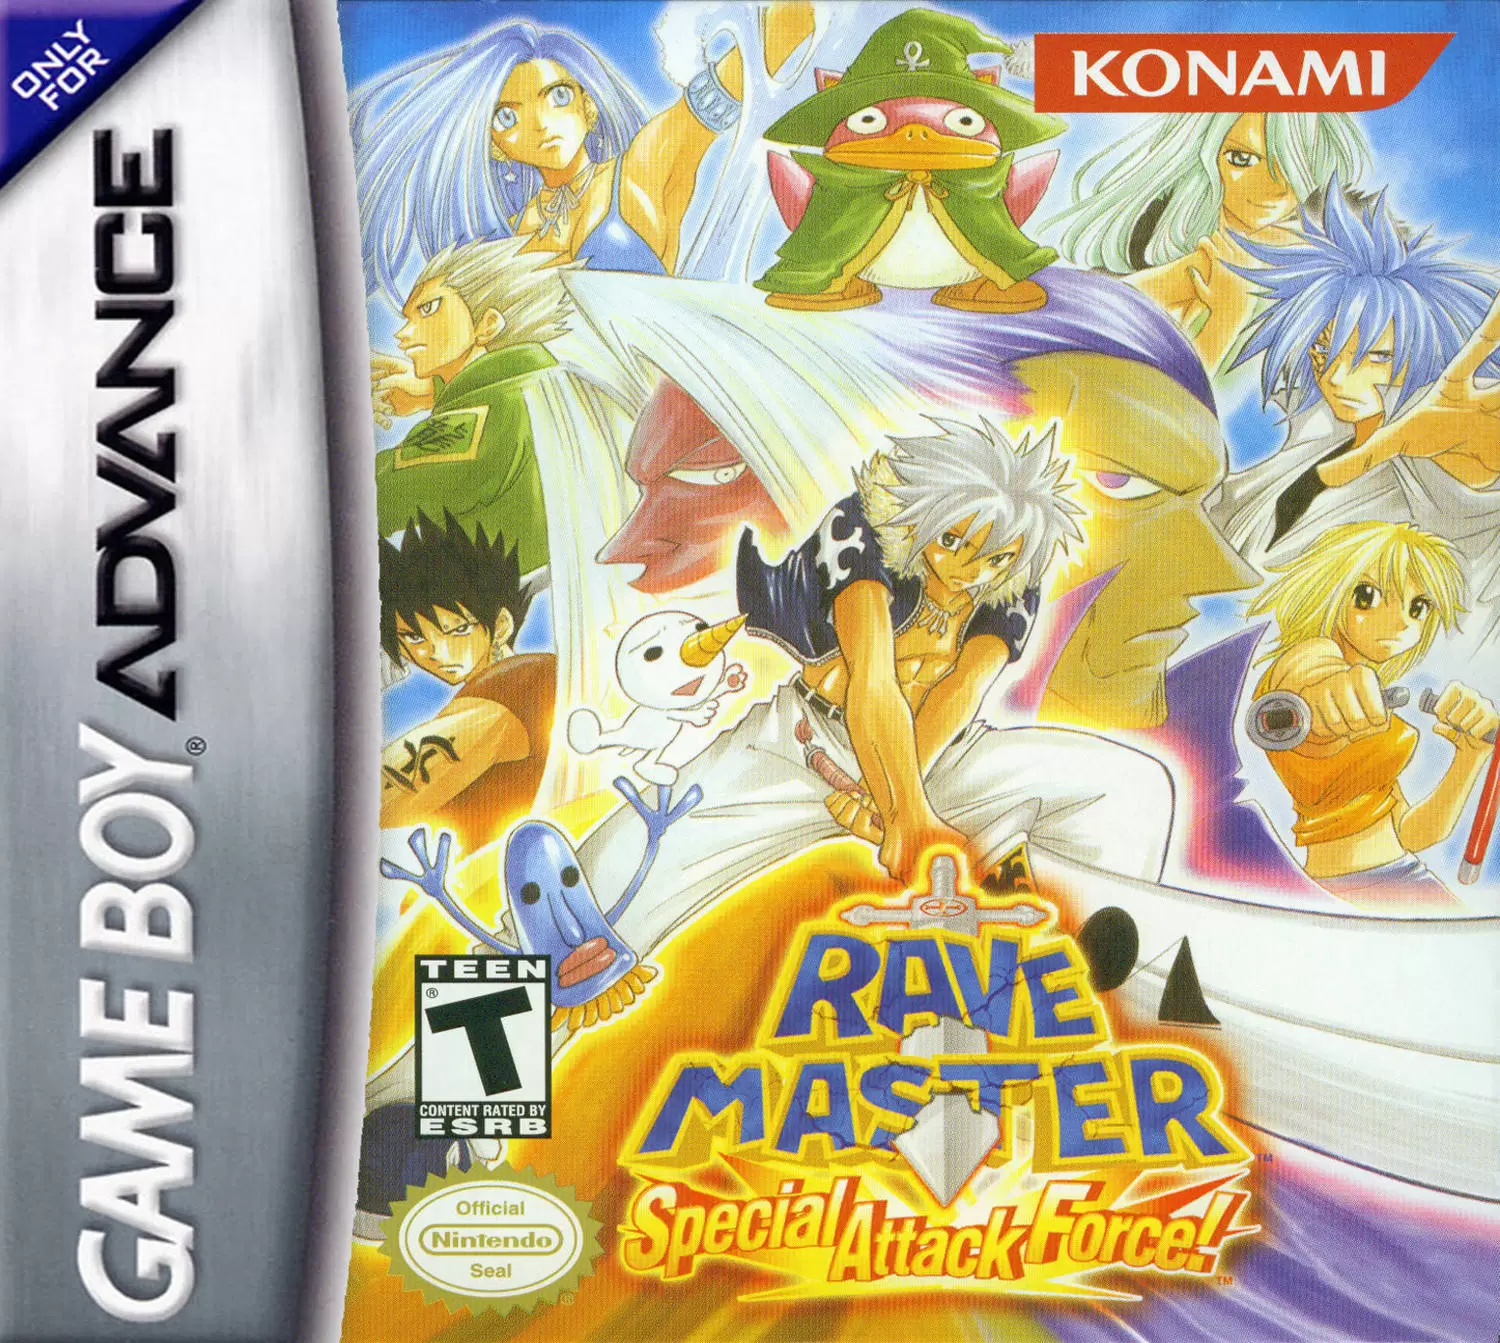 Jeux Game Boy Advance - Rave Master: Special Attack Force!